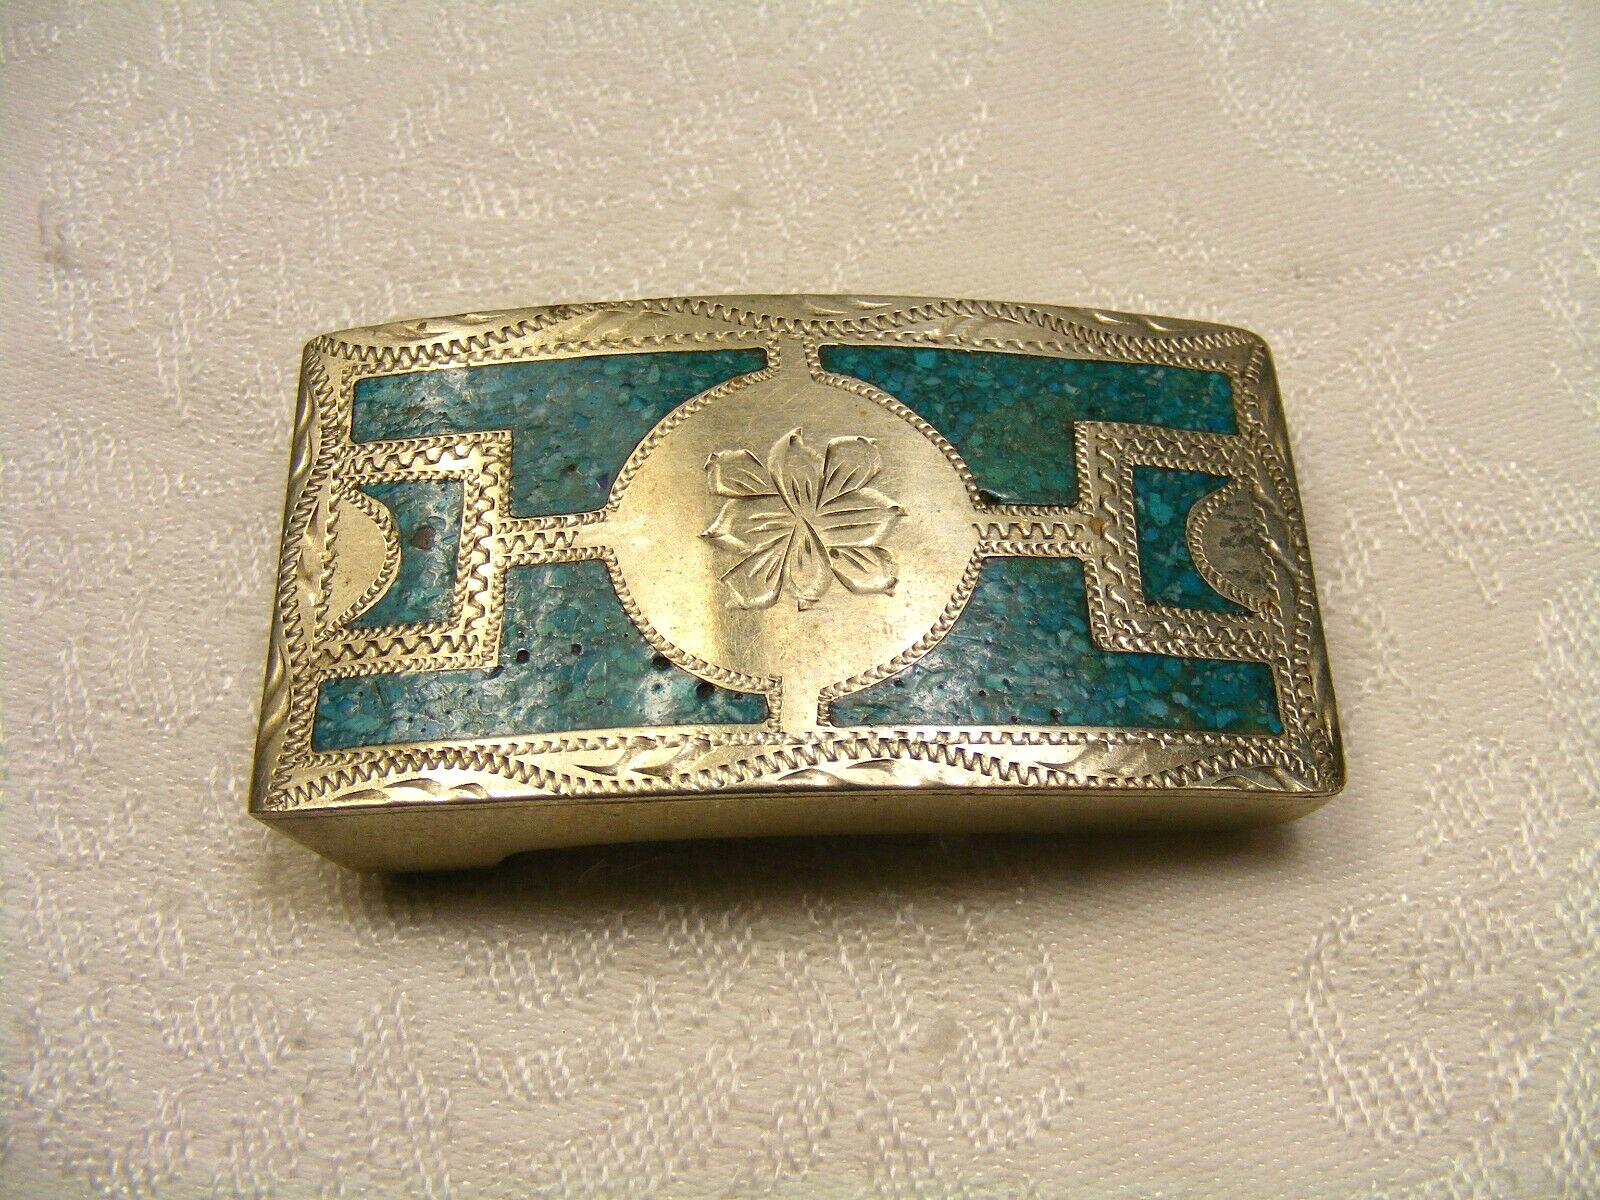 Vintage Decorative Turquoise Belt Buckle Made in Mexico 17-b